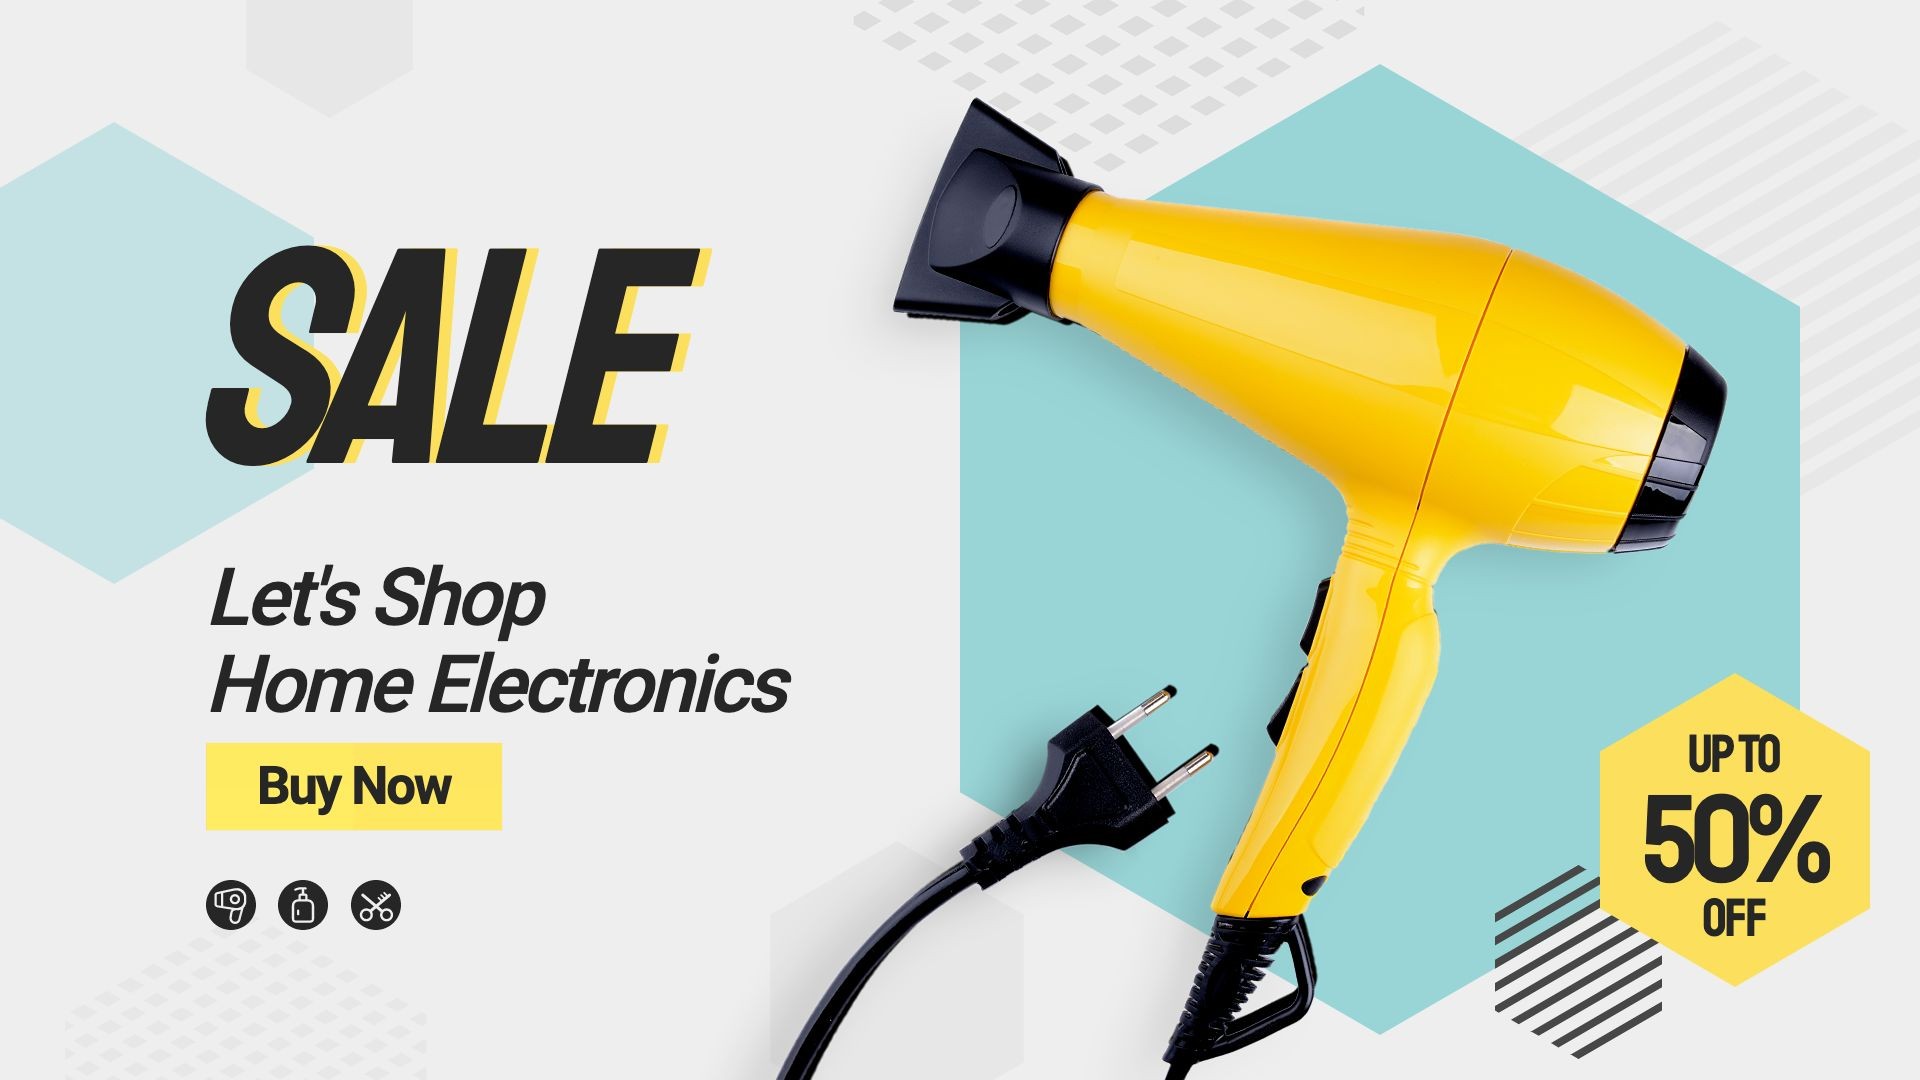 Hexagon Element Hair Dryer Home Electronic Appliance Discount Sale Promo Ecommerce Banner预览效果